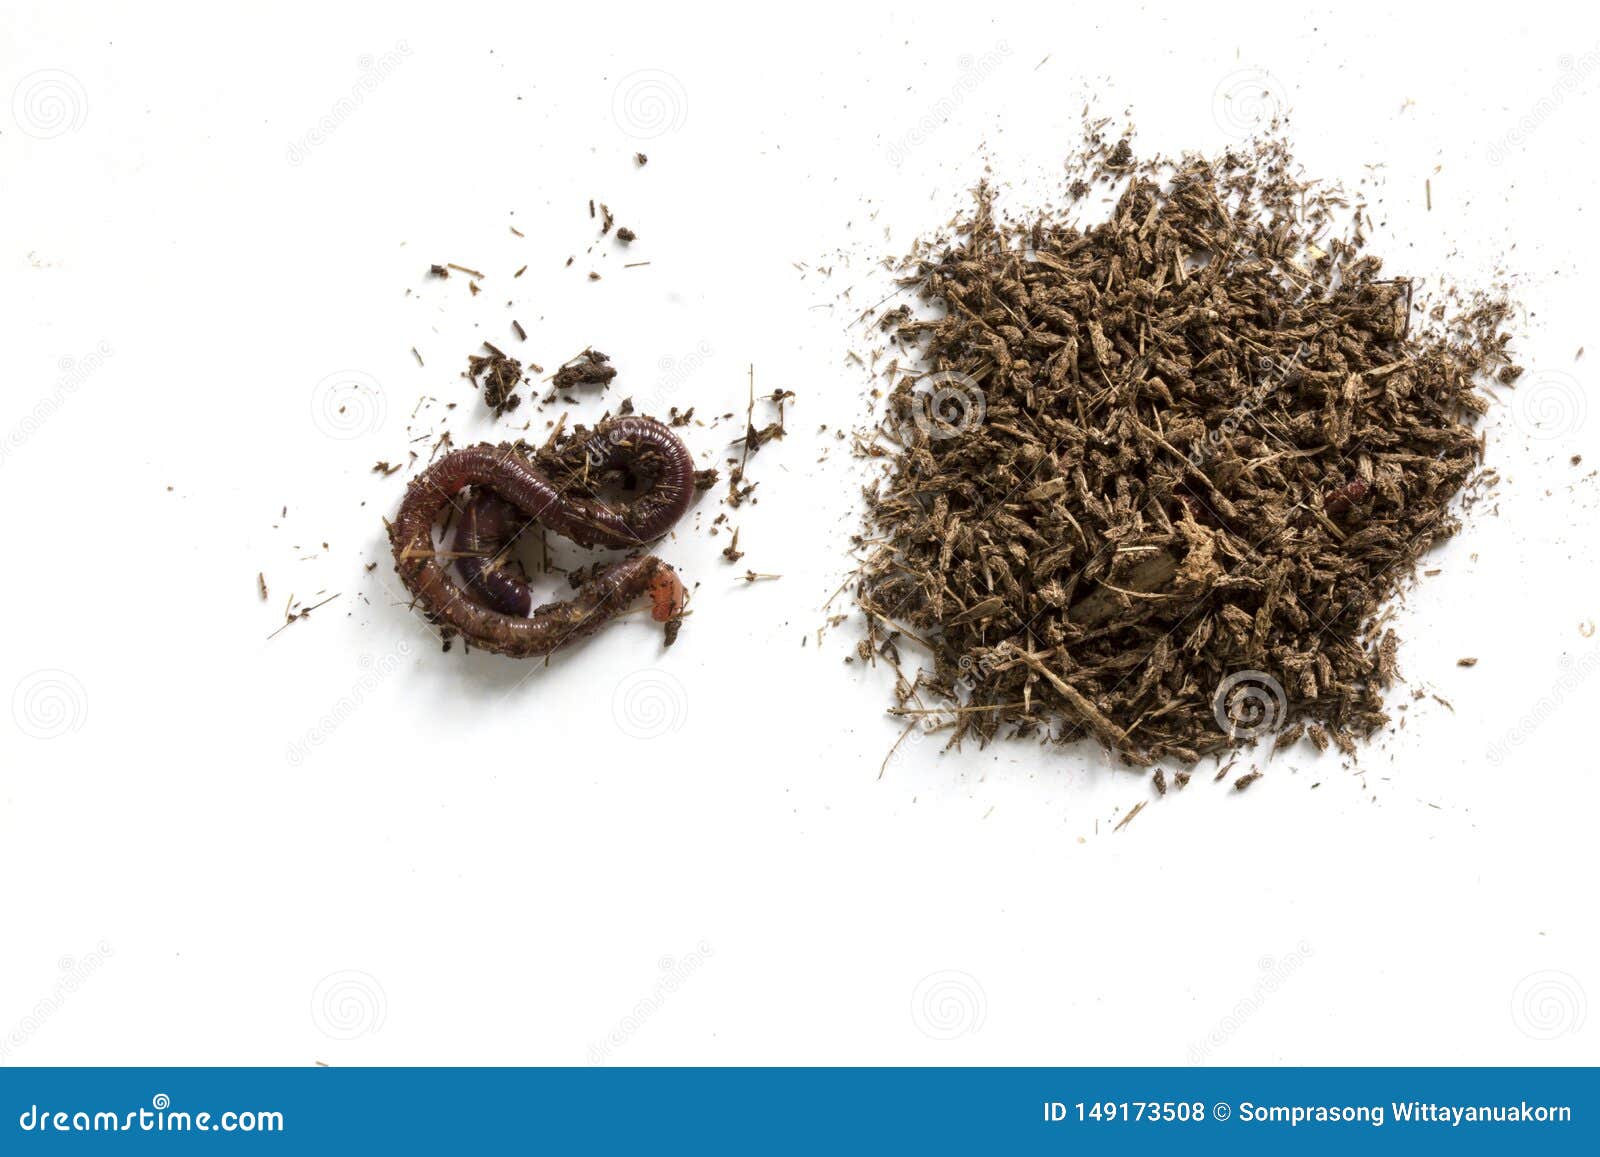 Groups Of Earthworm African Night Crawler On The Ground Stock Photo,  Picture and Royalty Free Image. Image 152750741.